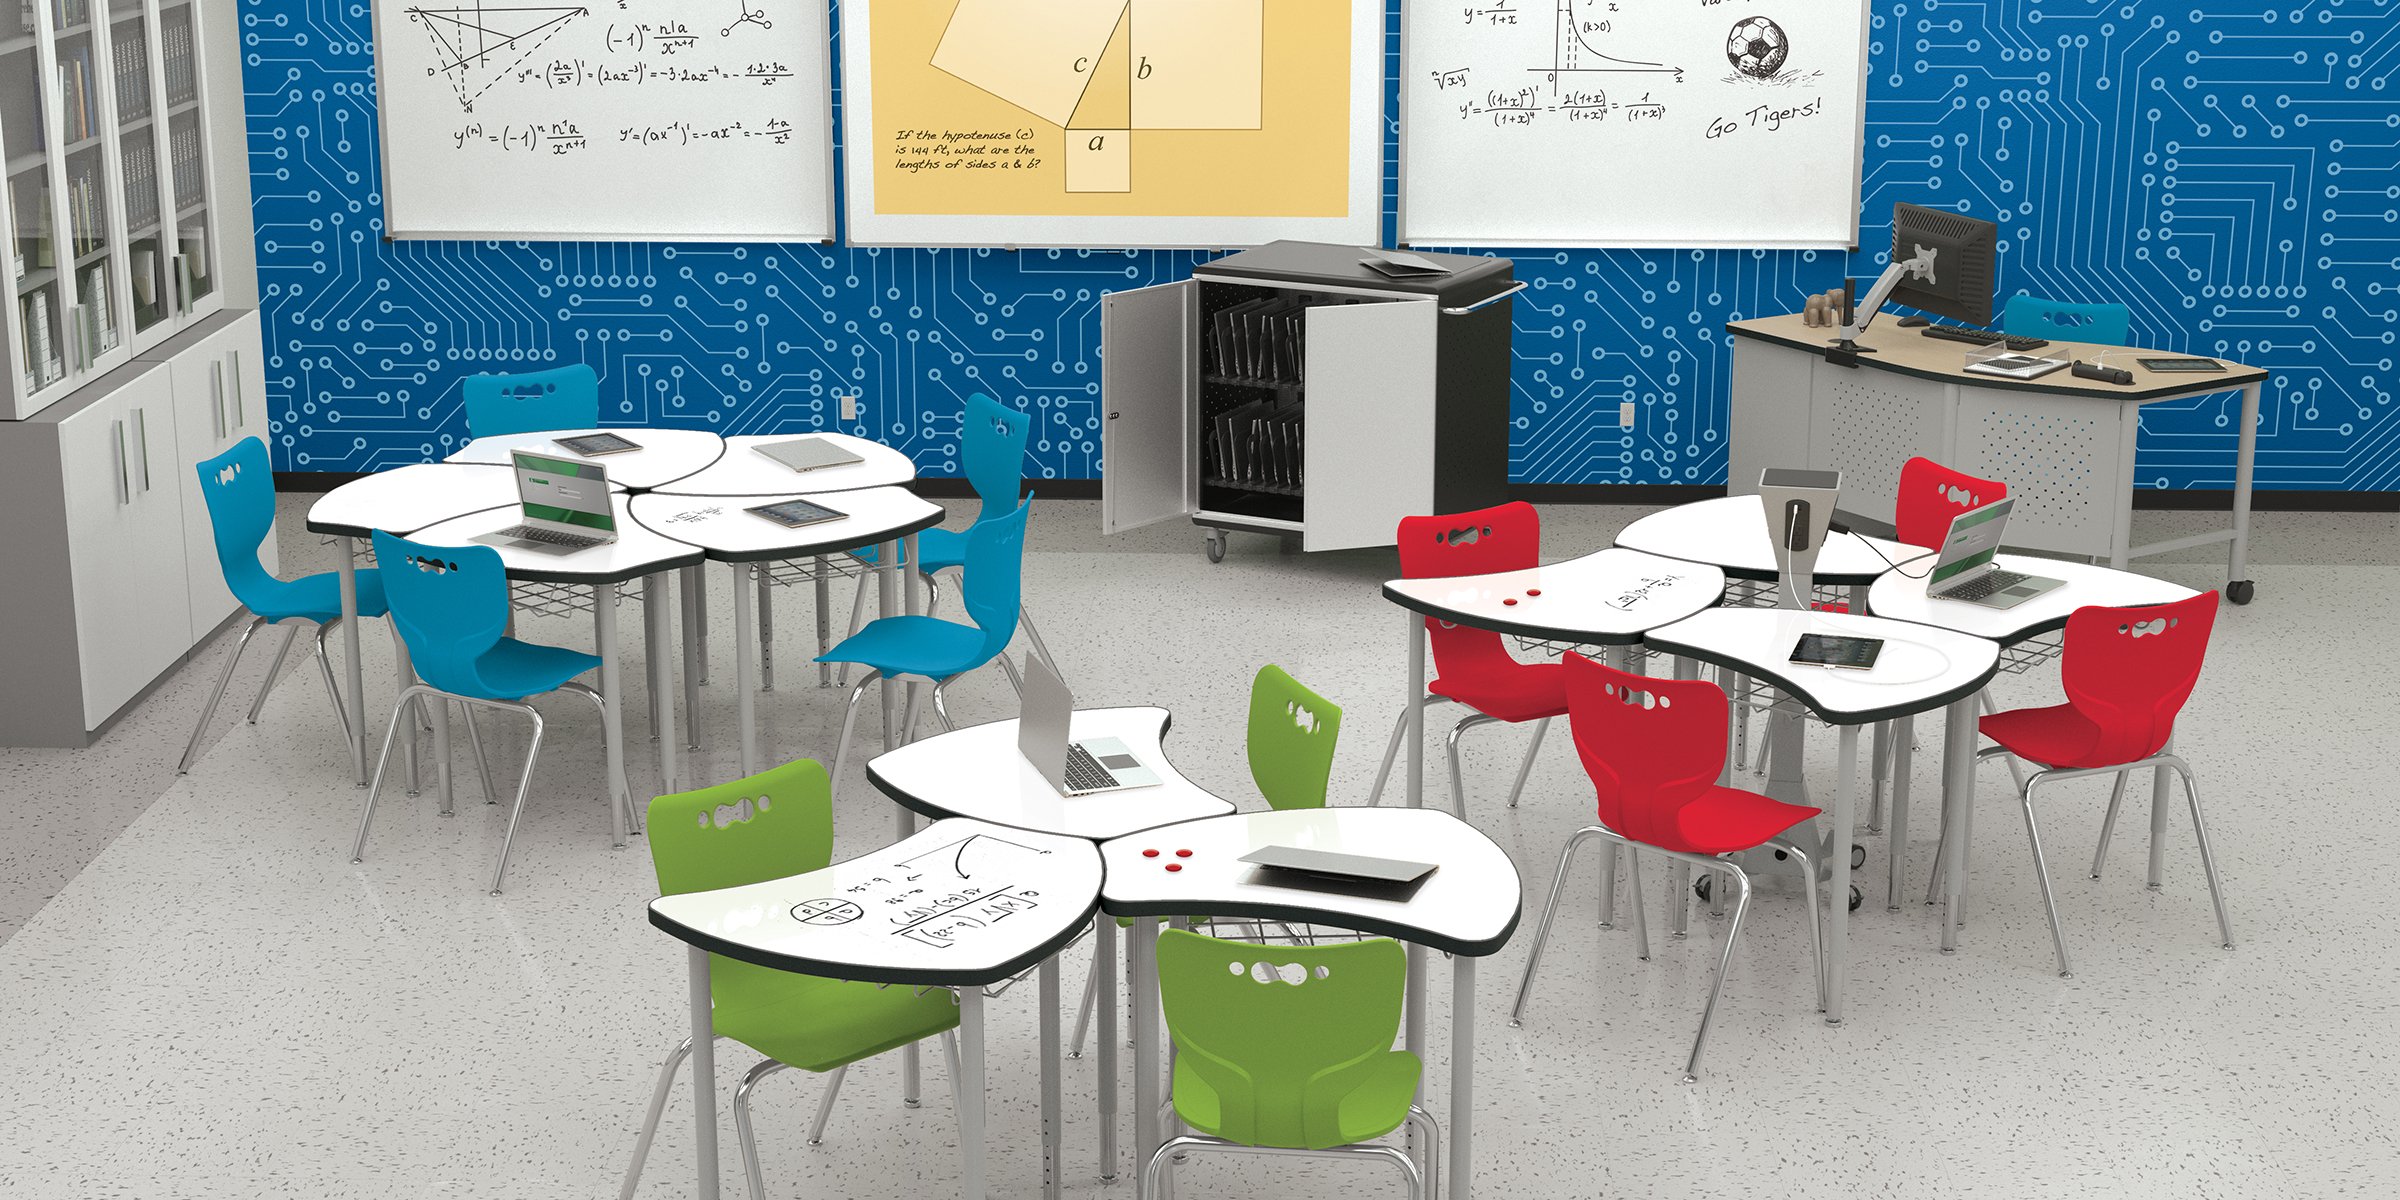 MooreCo Classroom with QuickShip furniture